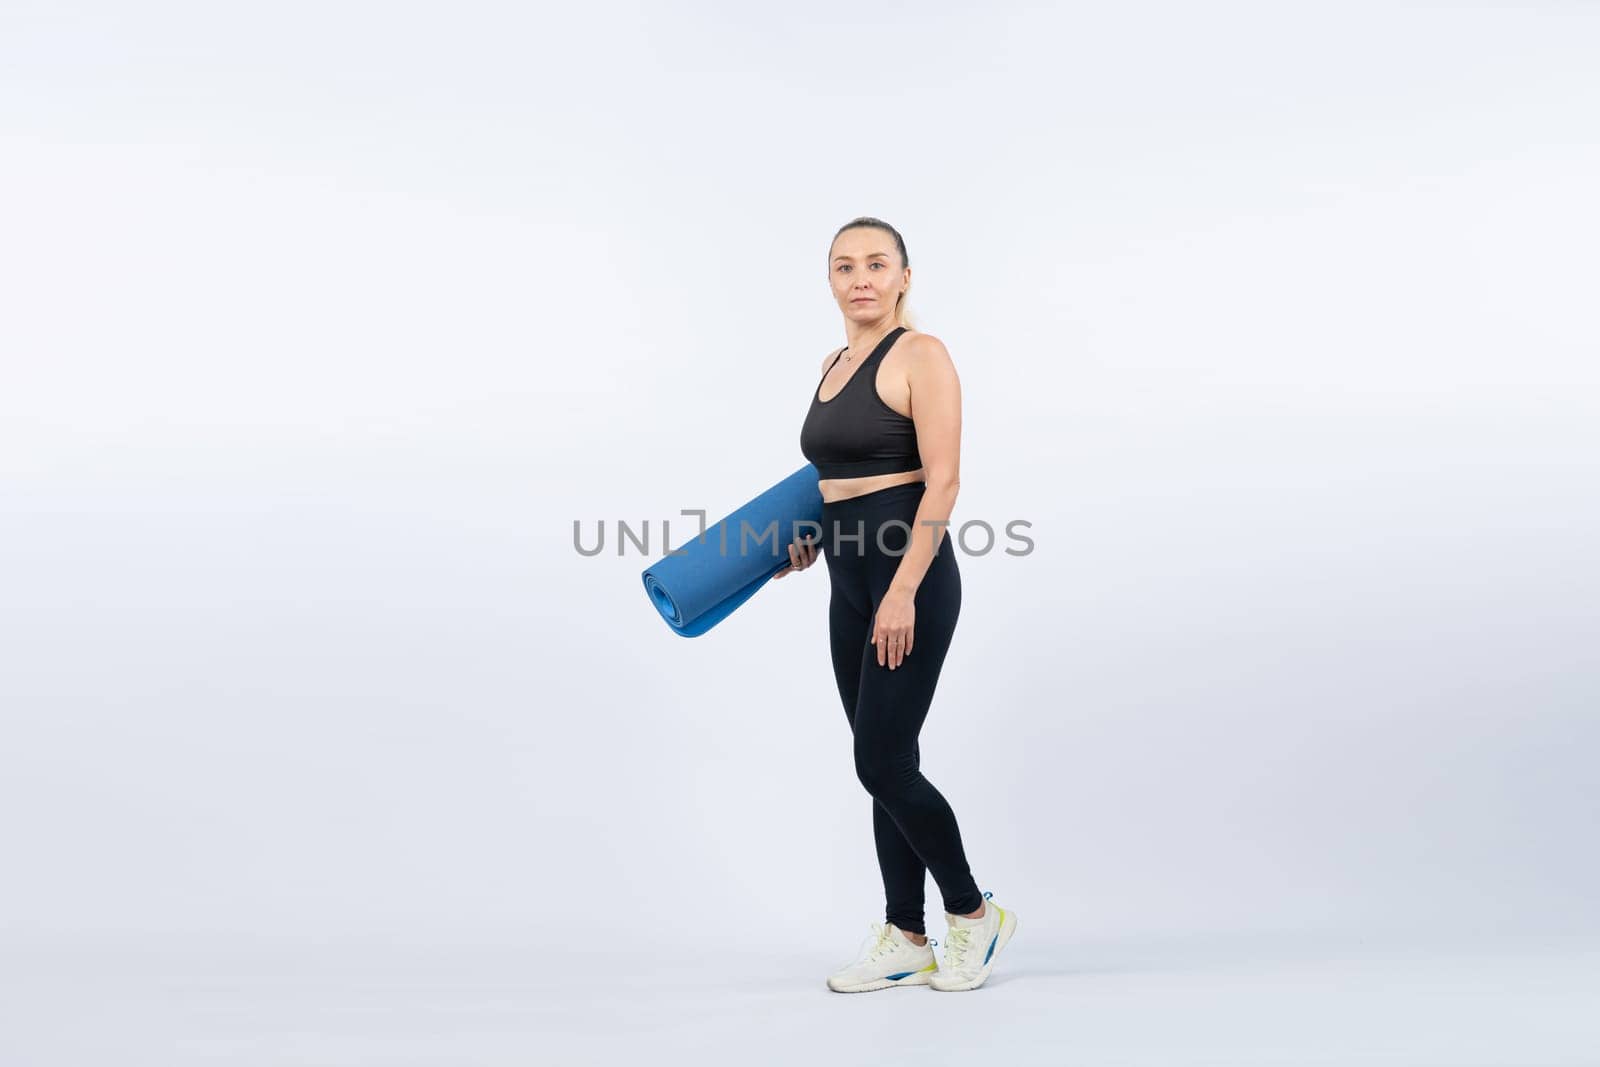 Full body length shot athletic and sporty senior woman holding fitness exercising mat on isolated background. Healthy active physique and body care lifestyle after retirement. Clout